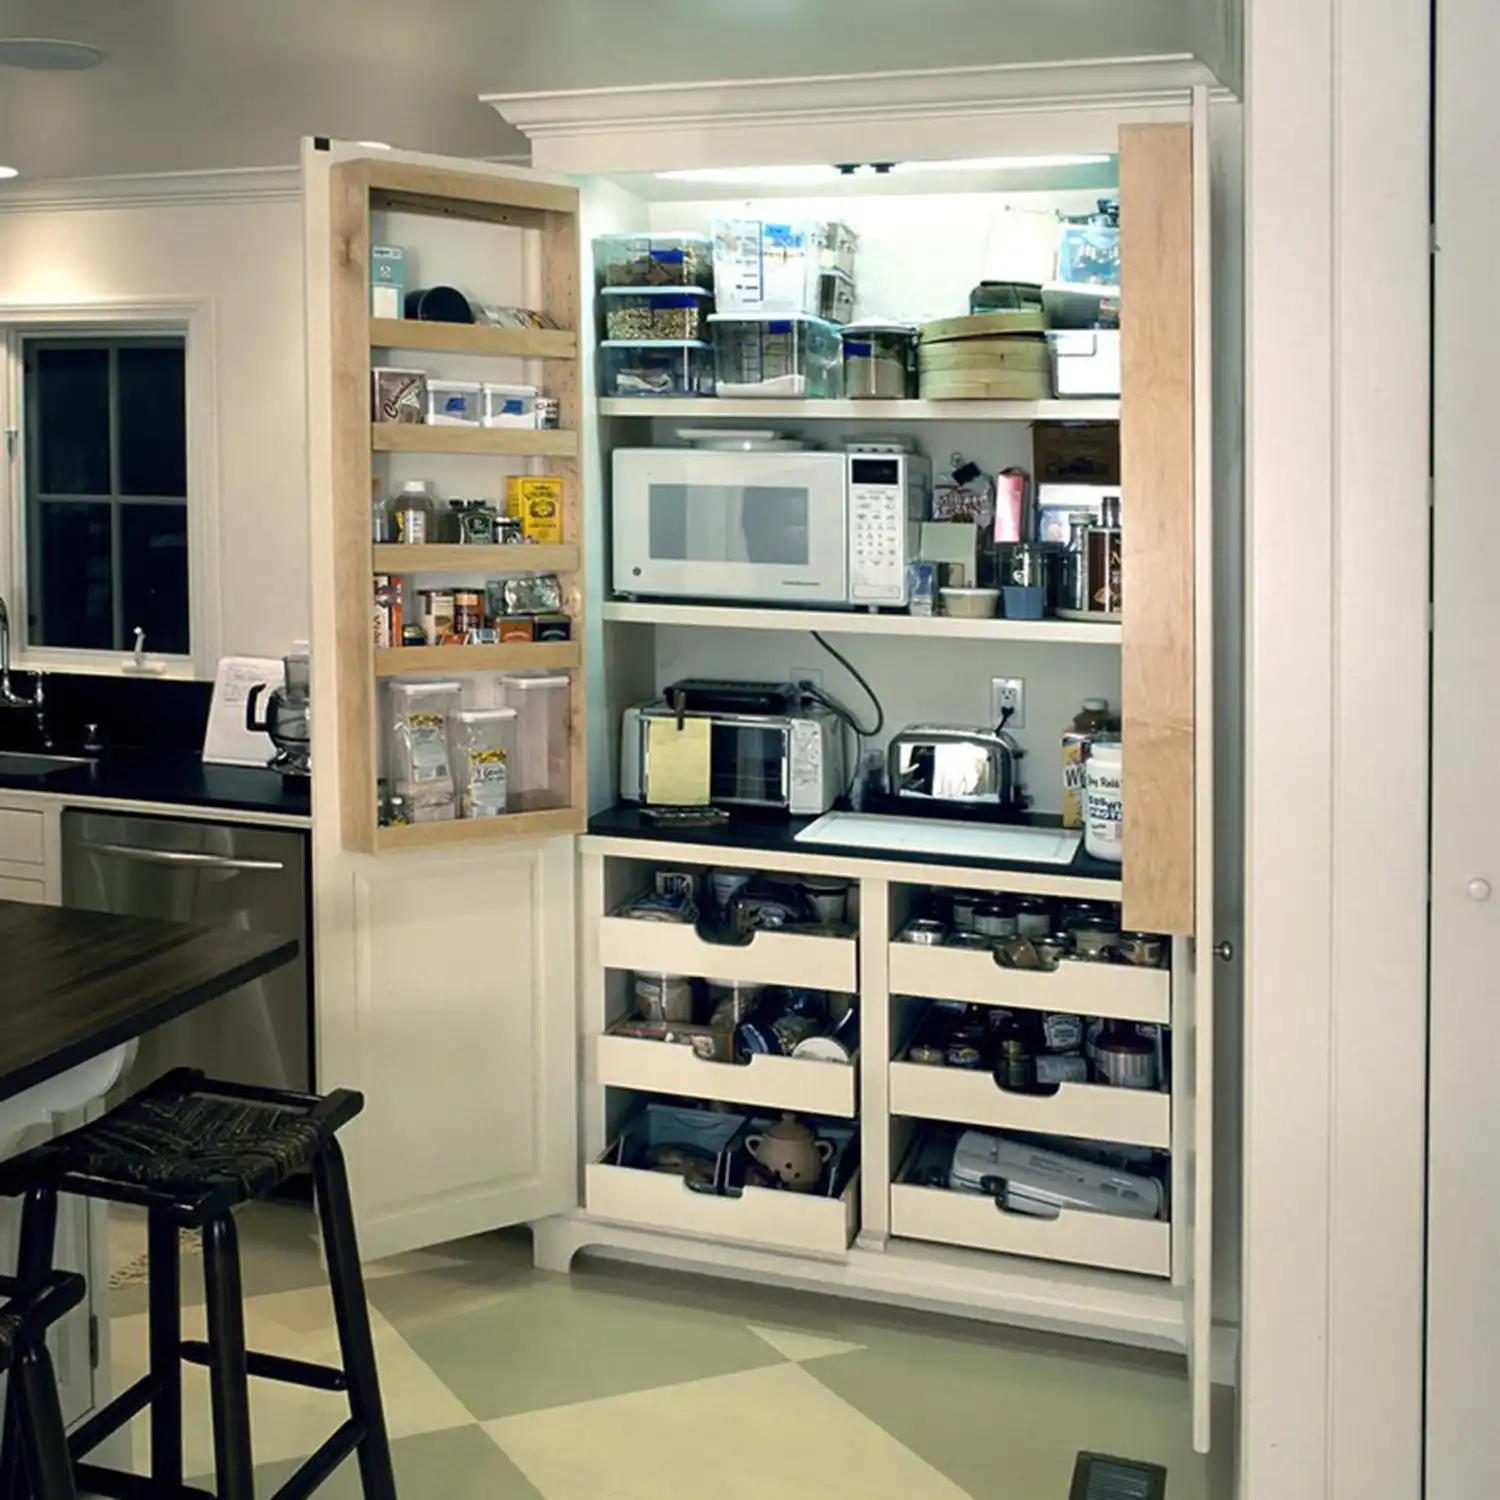 Maximizing Space: Hiding Smaller Appliances in the Pantry